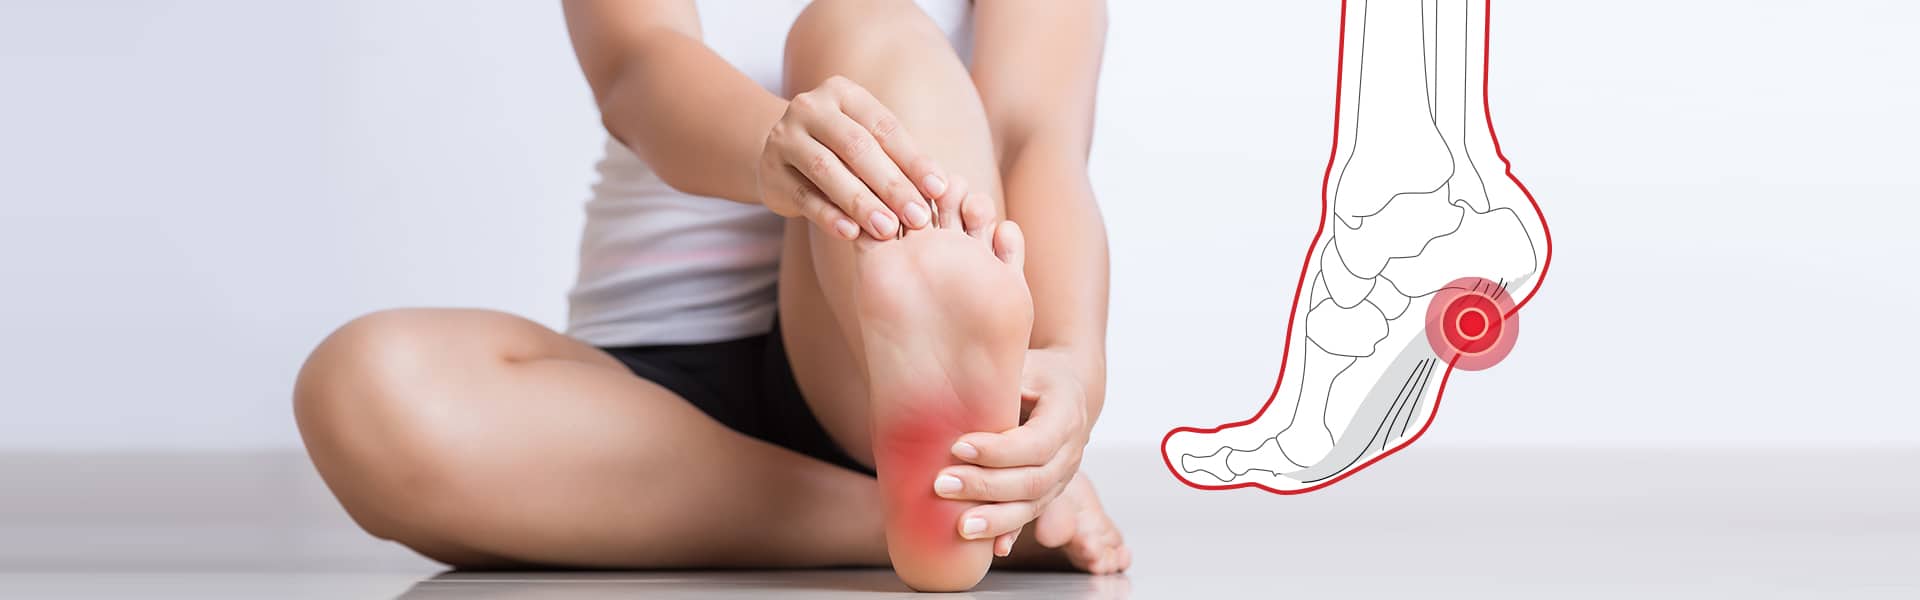 What to Do About Plantar Fasciitis Pain